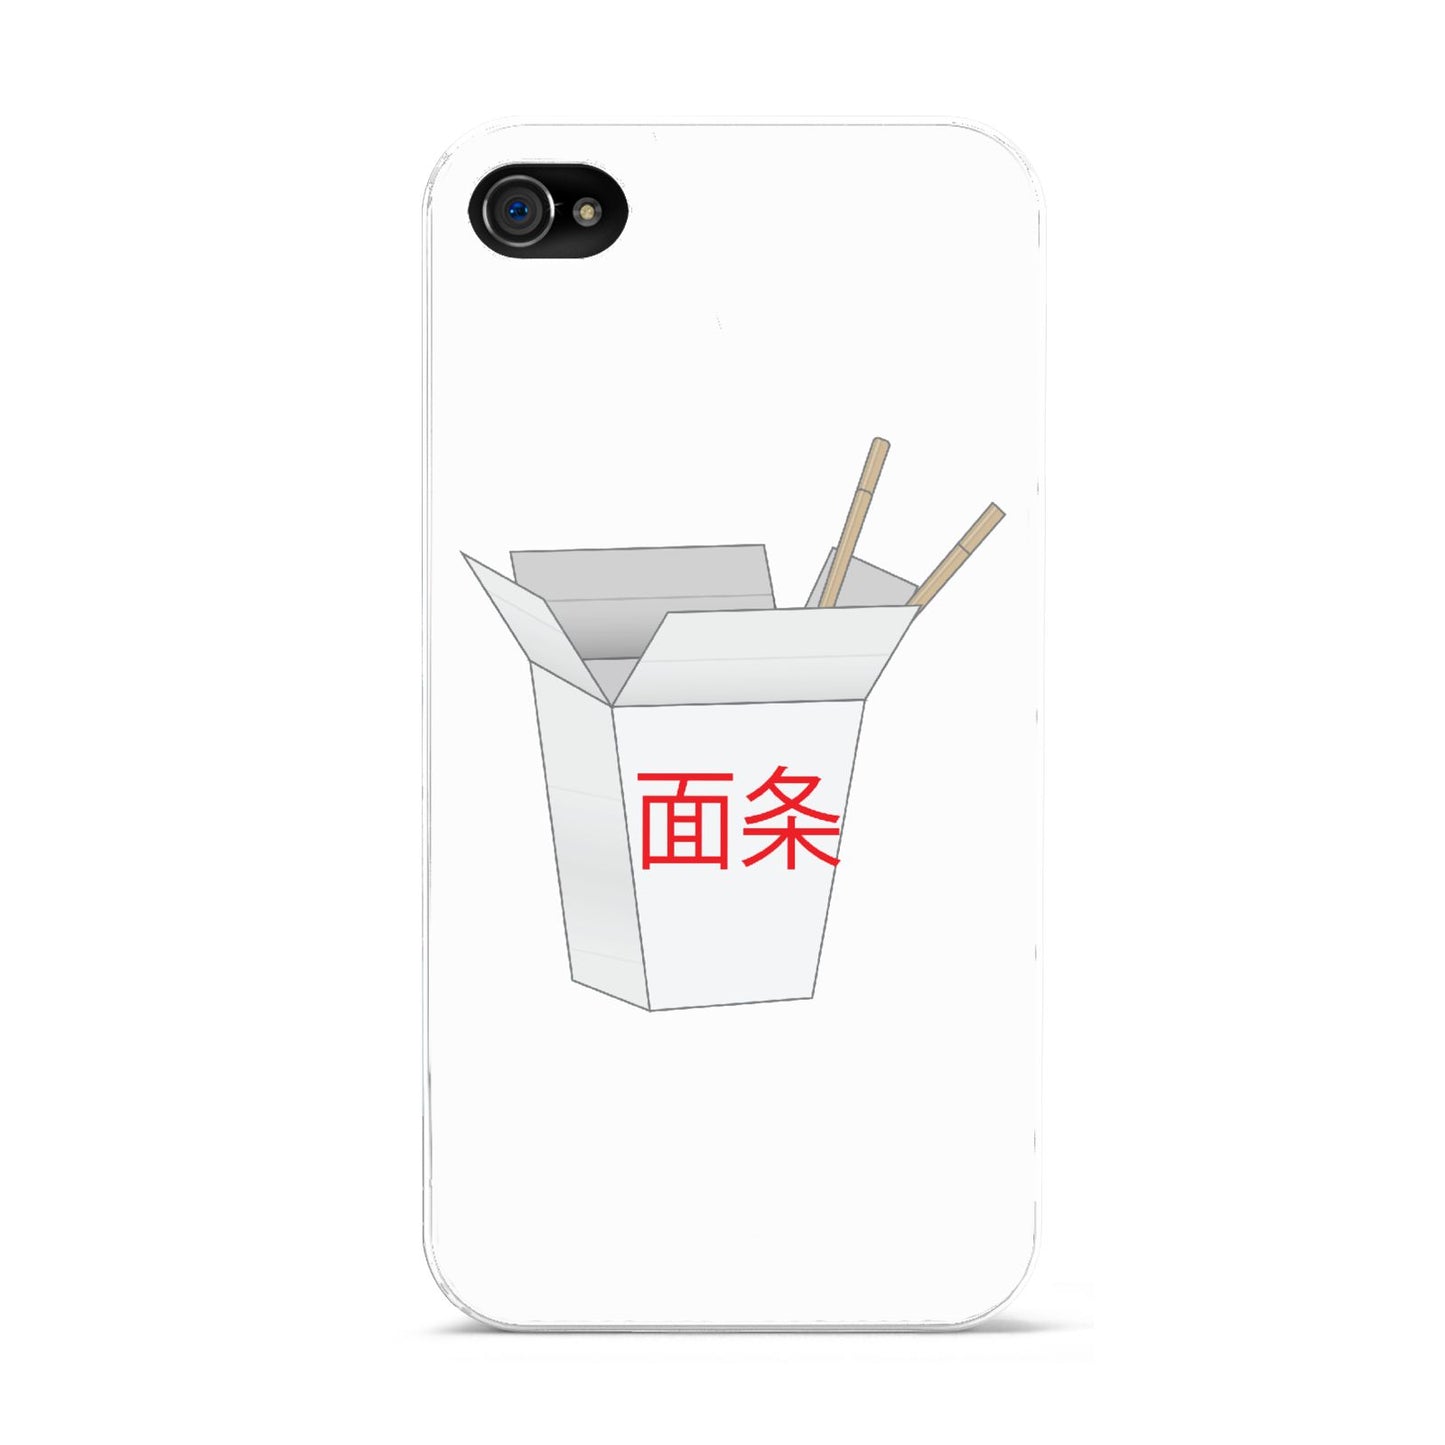 Chinese Takeaway Box Apple iPhone 4s Case